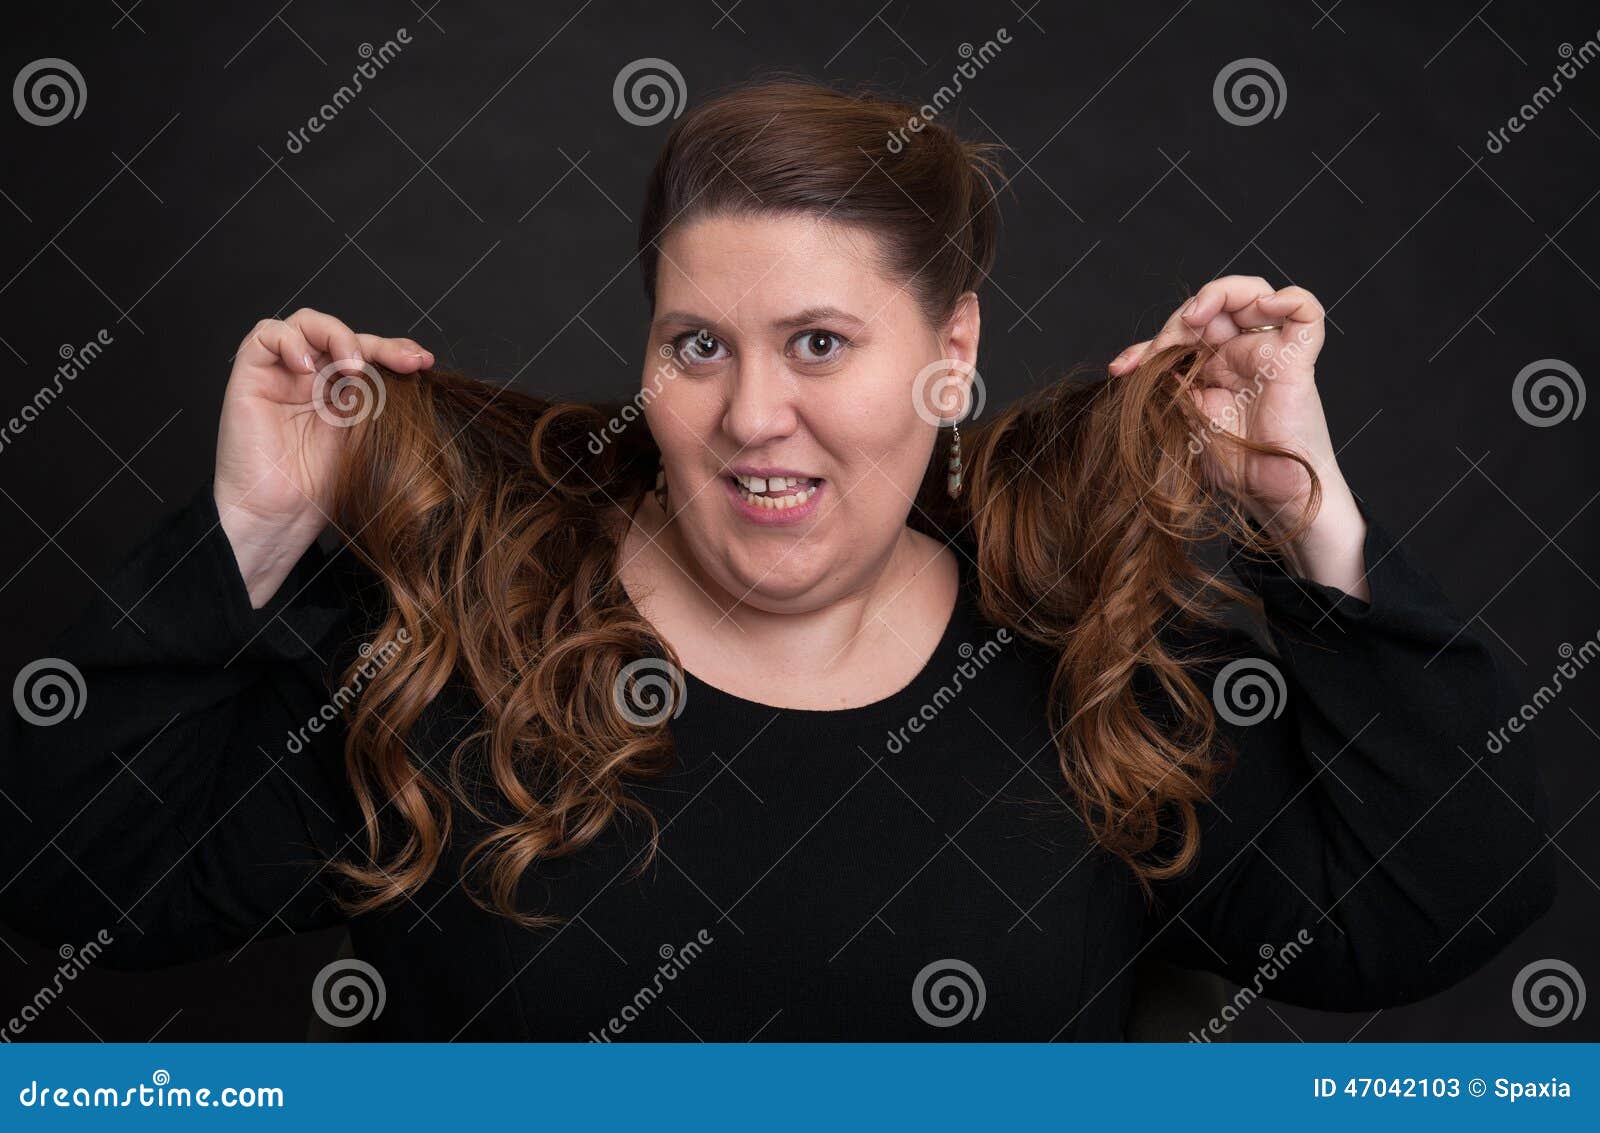 fat woman with long curly hair stock image - image of hair